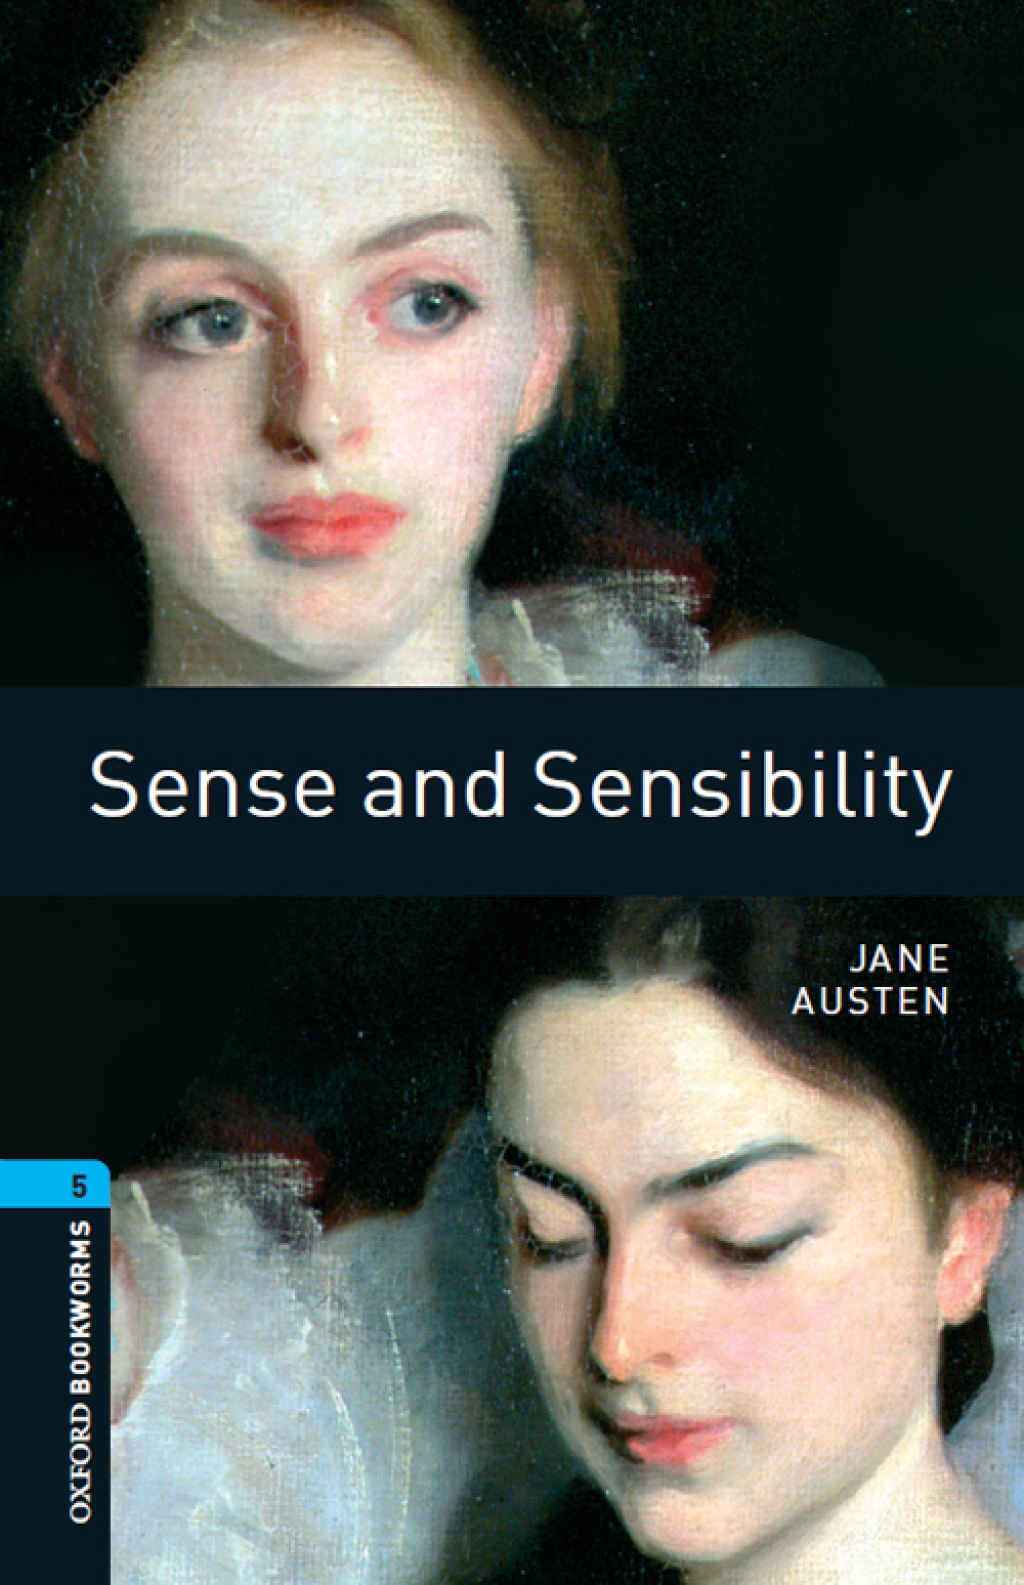 Sense and Sensibility Level 5 Oxford Bookworms Library - 3rd Edition (eBook Rental)